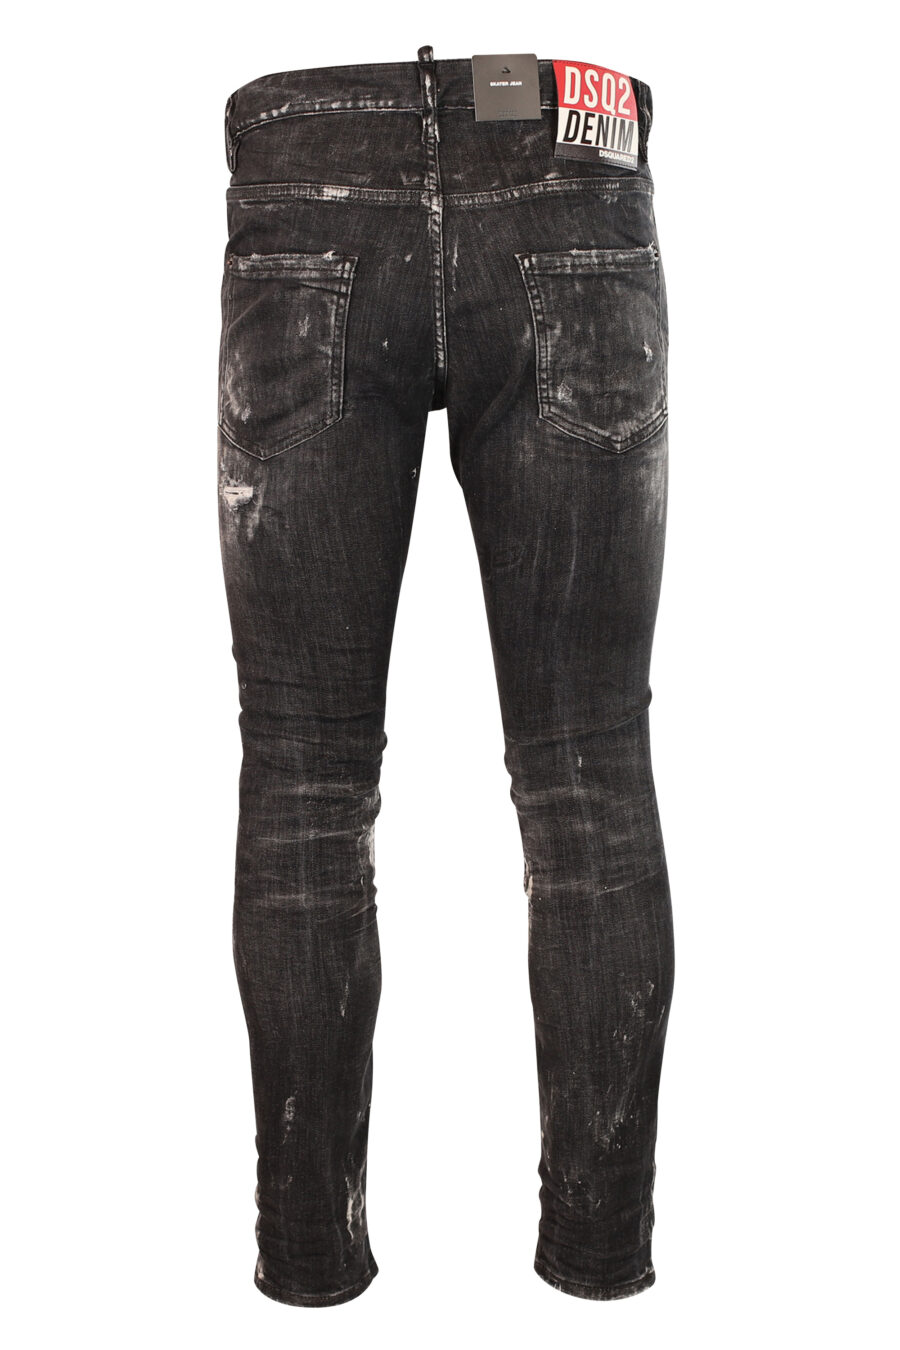 Skater jean trousers black worn out with rips - 8052134938102 3